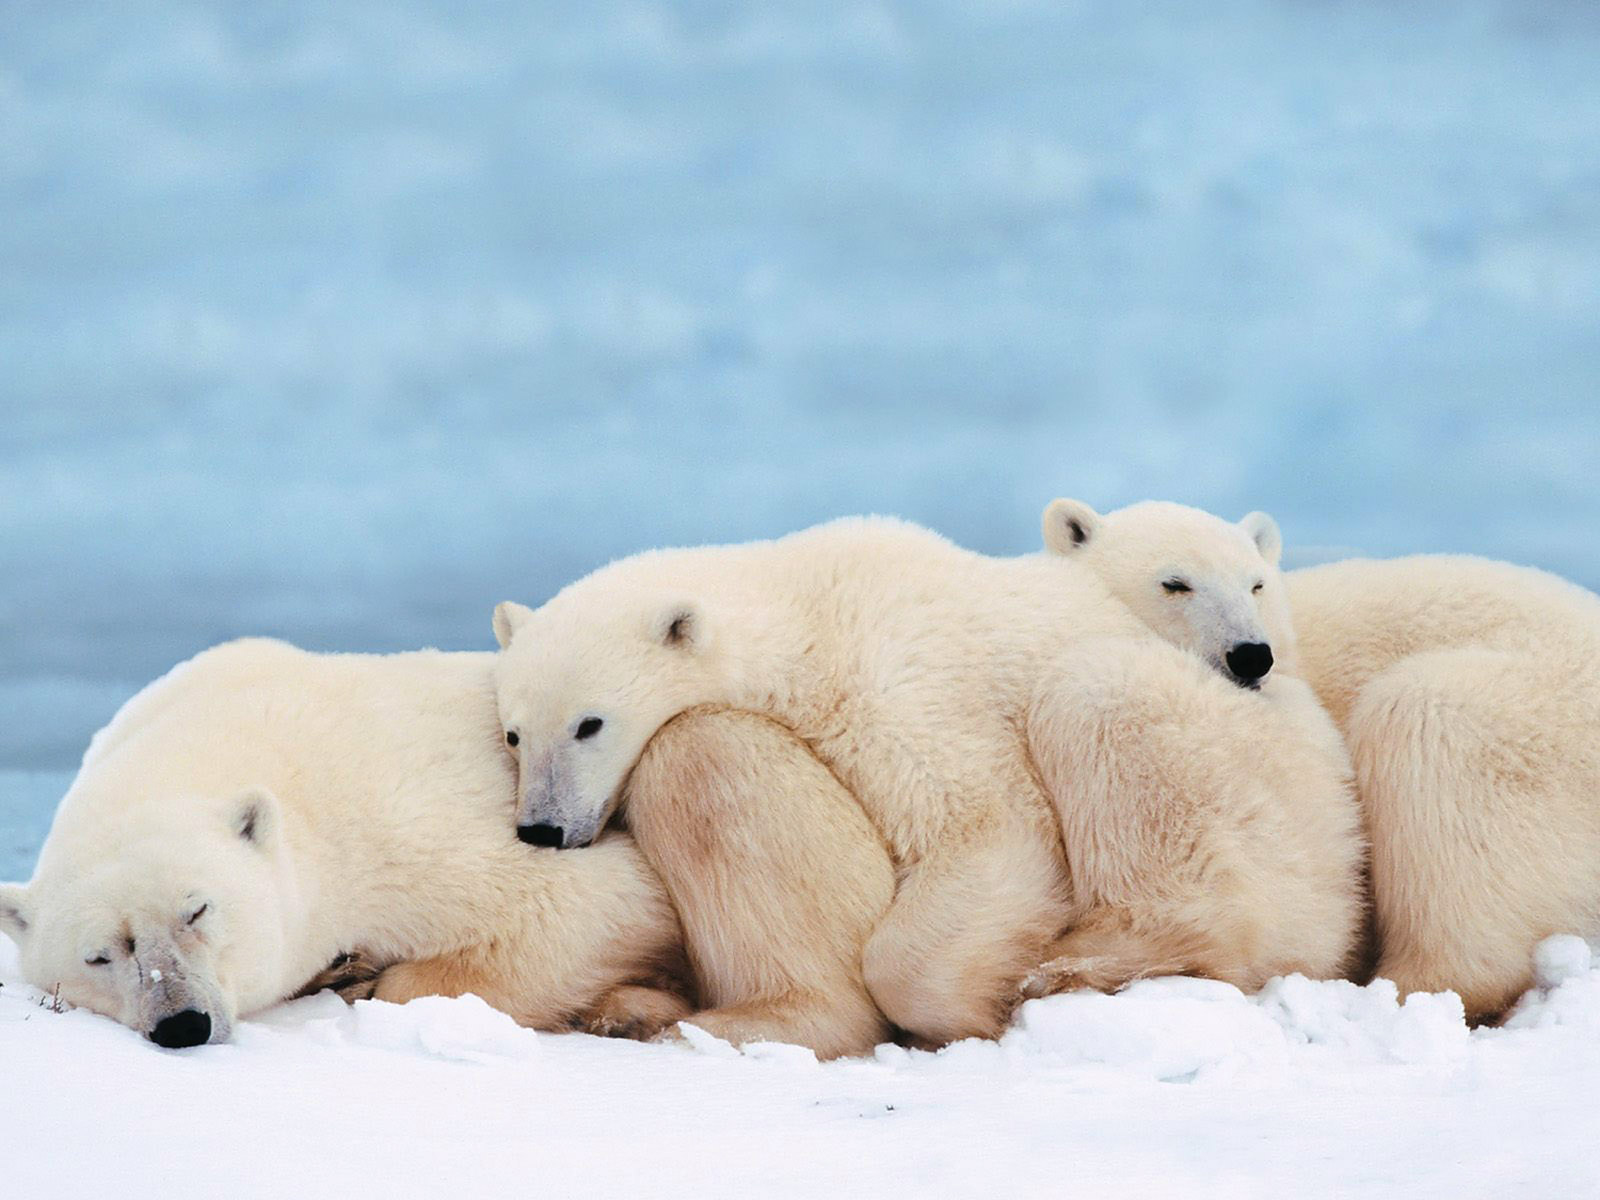 Wallpaper Of Polar Bears Pictures